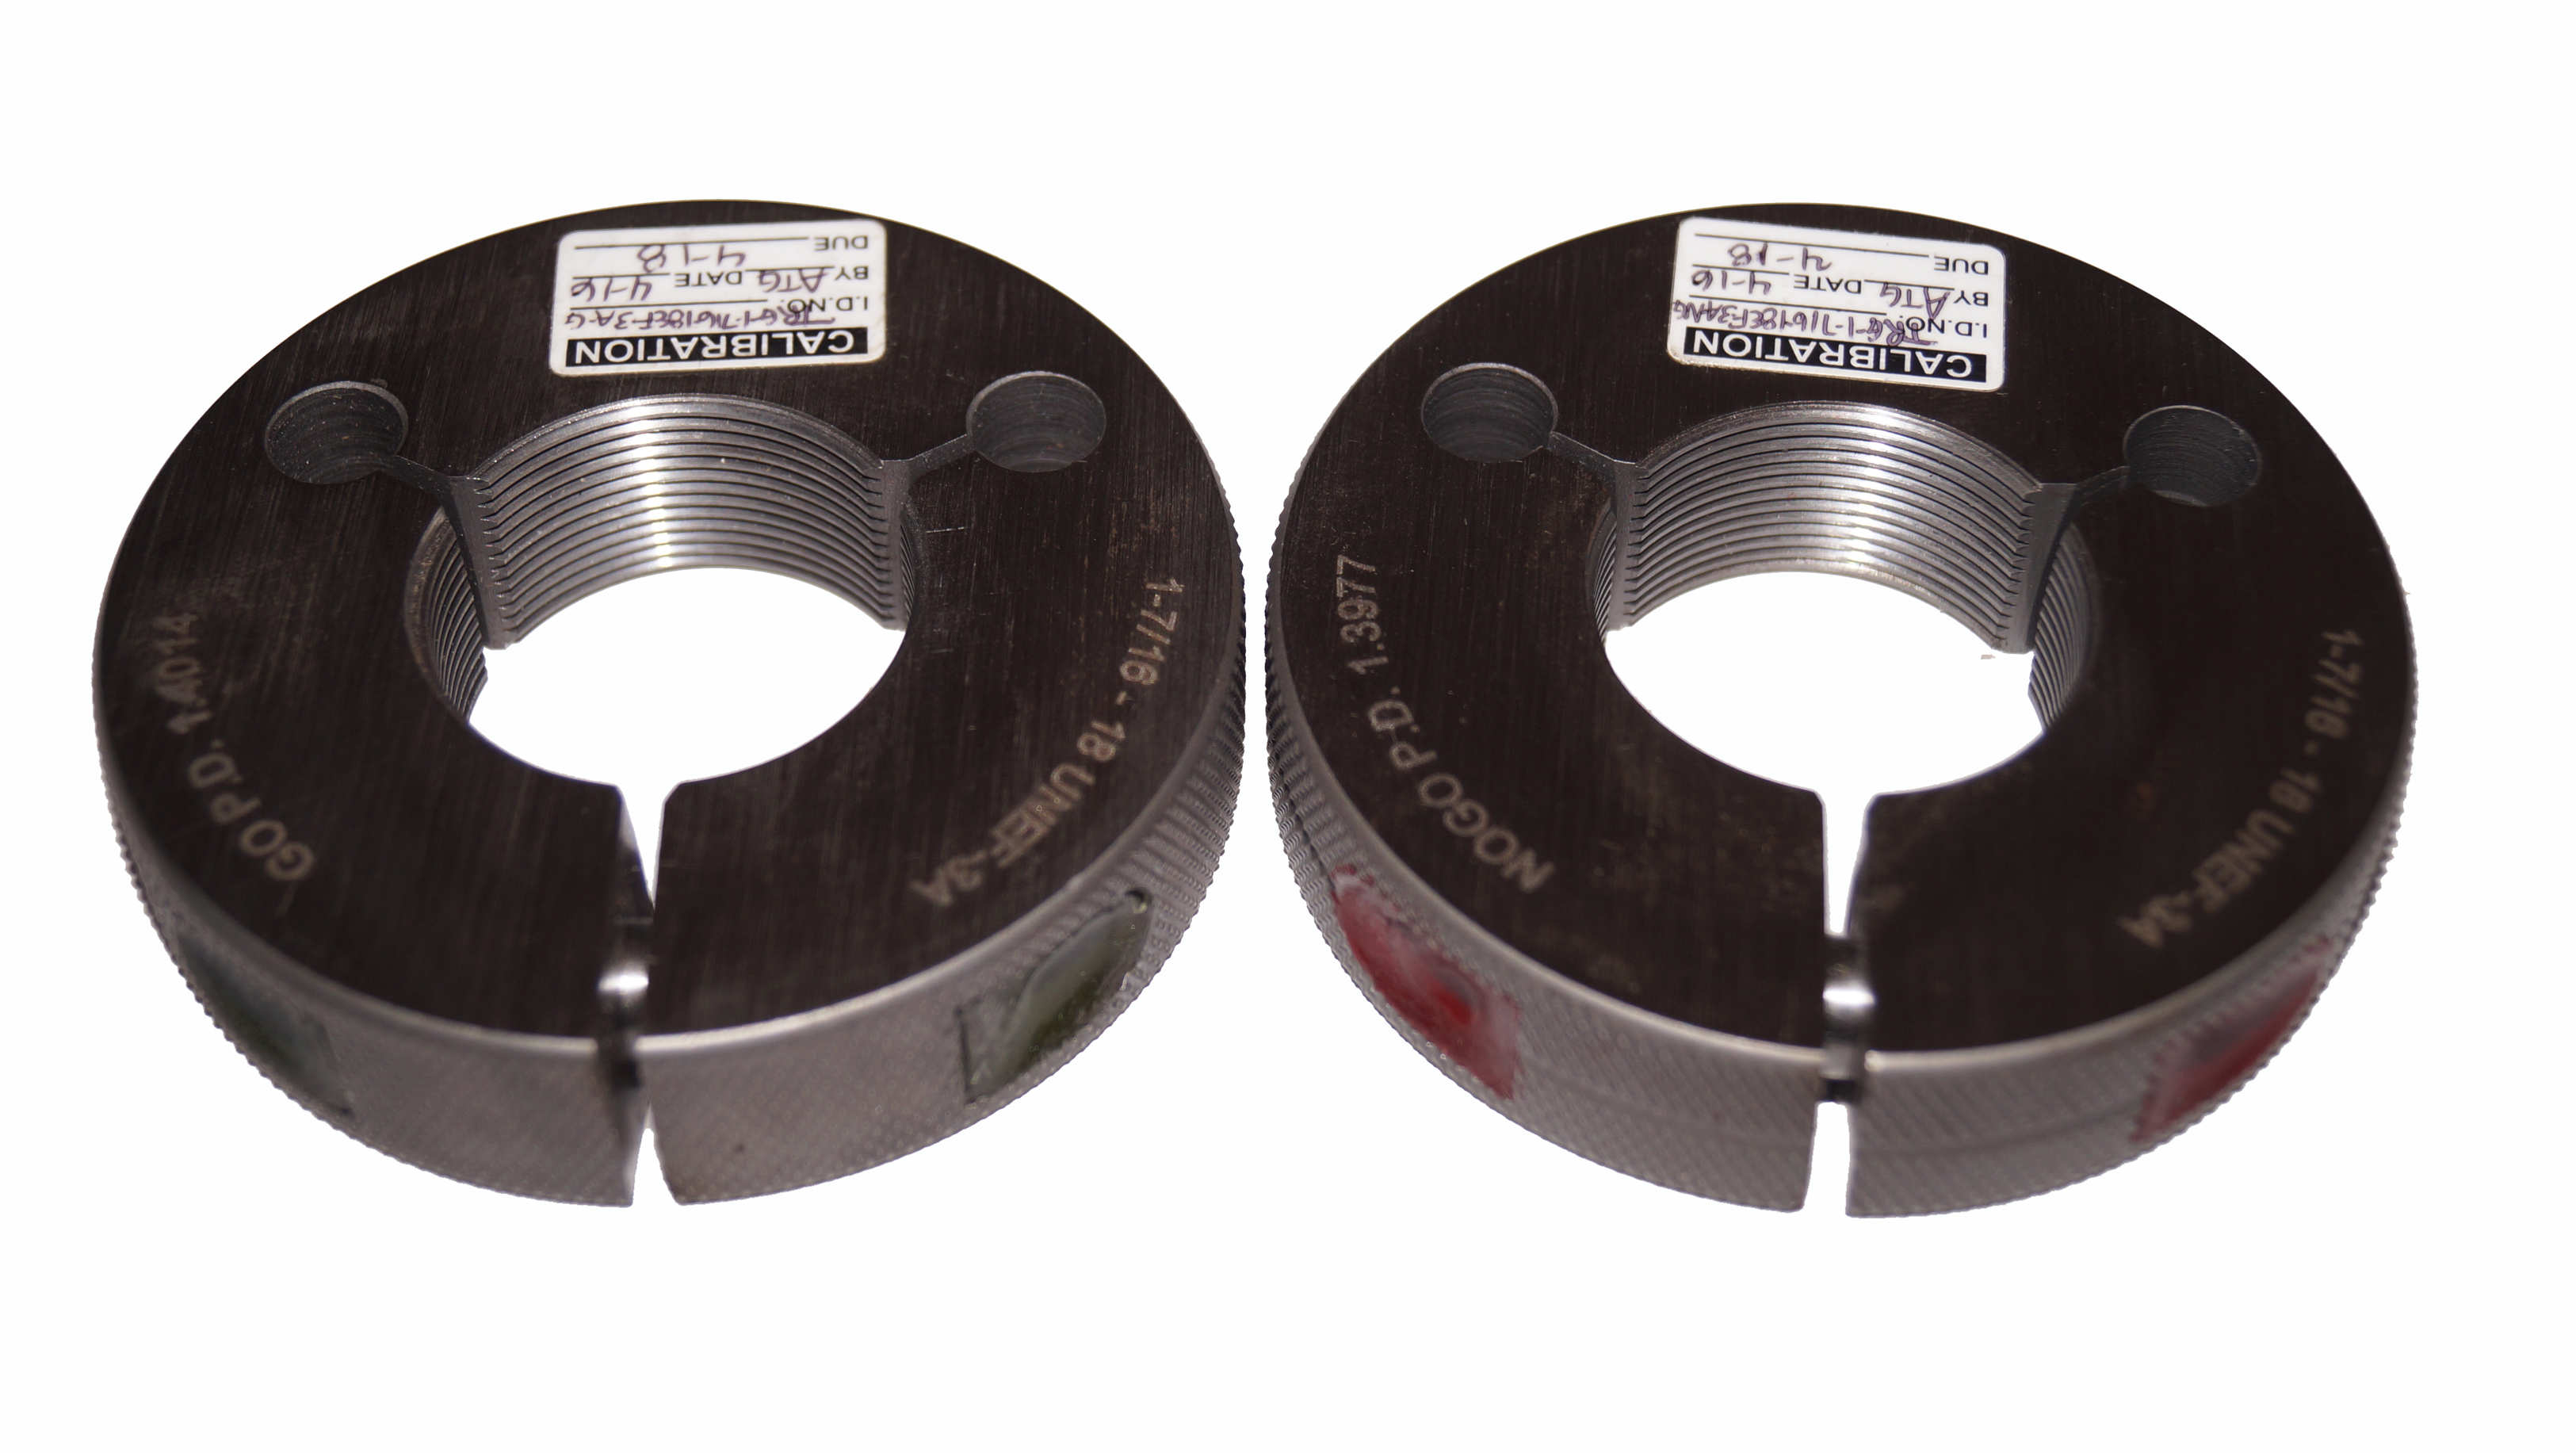 1/2 20 UNF 3A THREAD RING GAGES .5 GO NO GO P.D.'S = .4675 & .4643 INSPECTION 